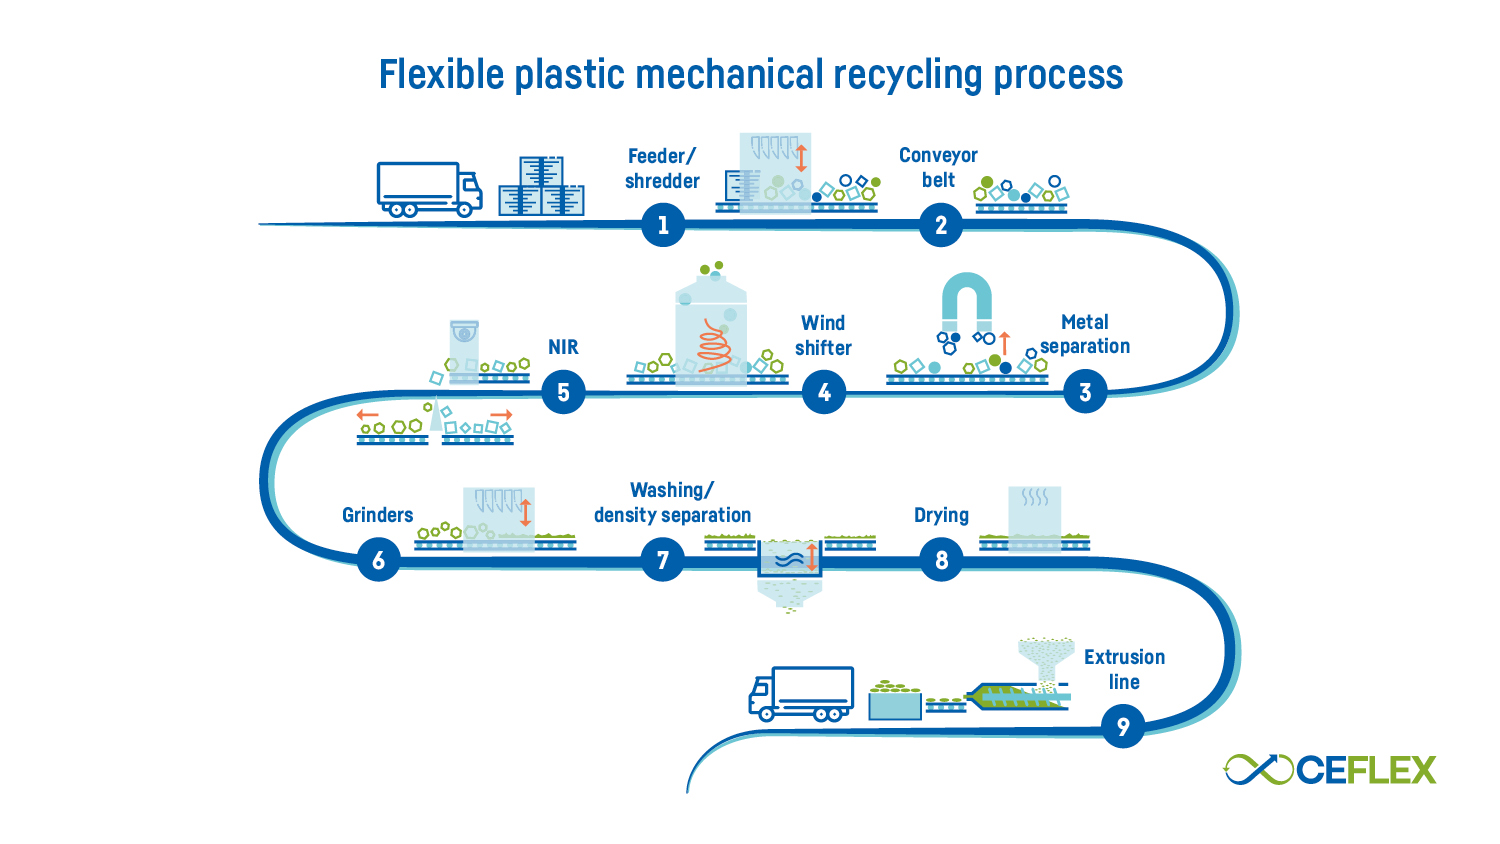 The flexible plastic mechanical recycling process